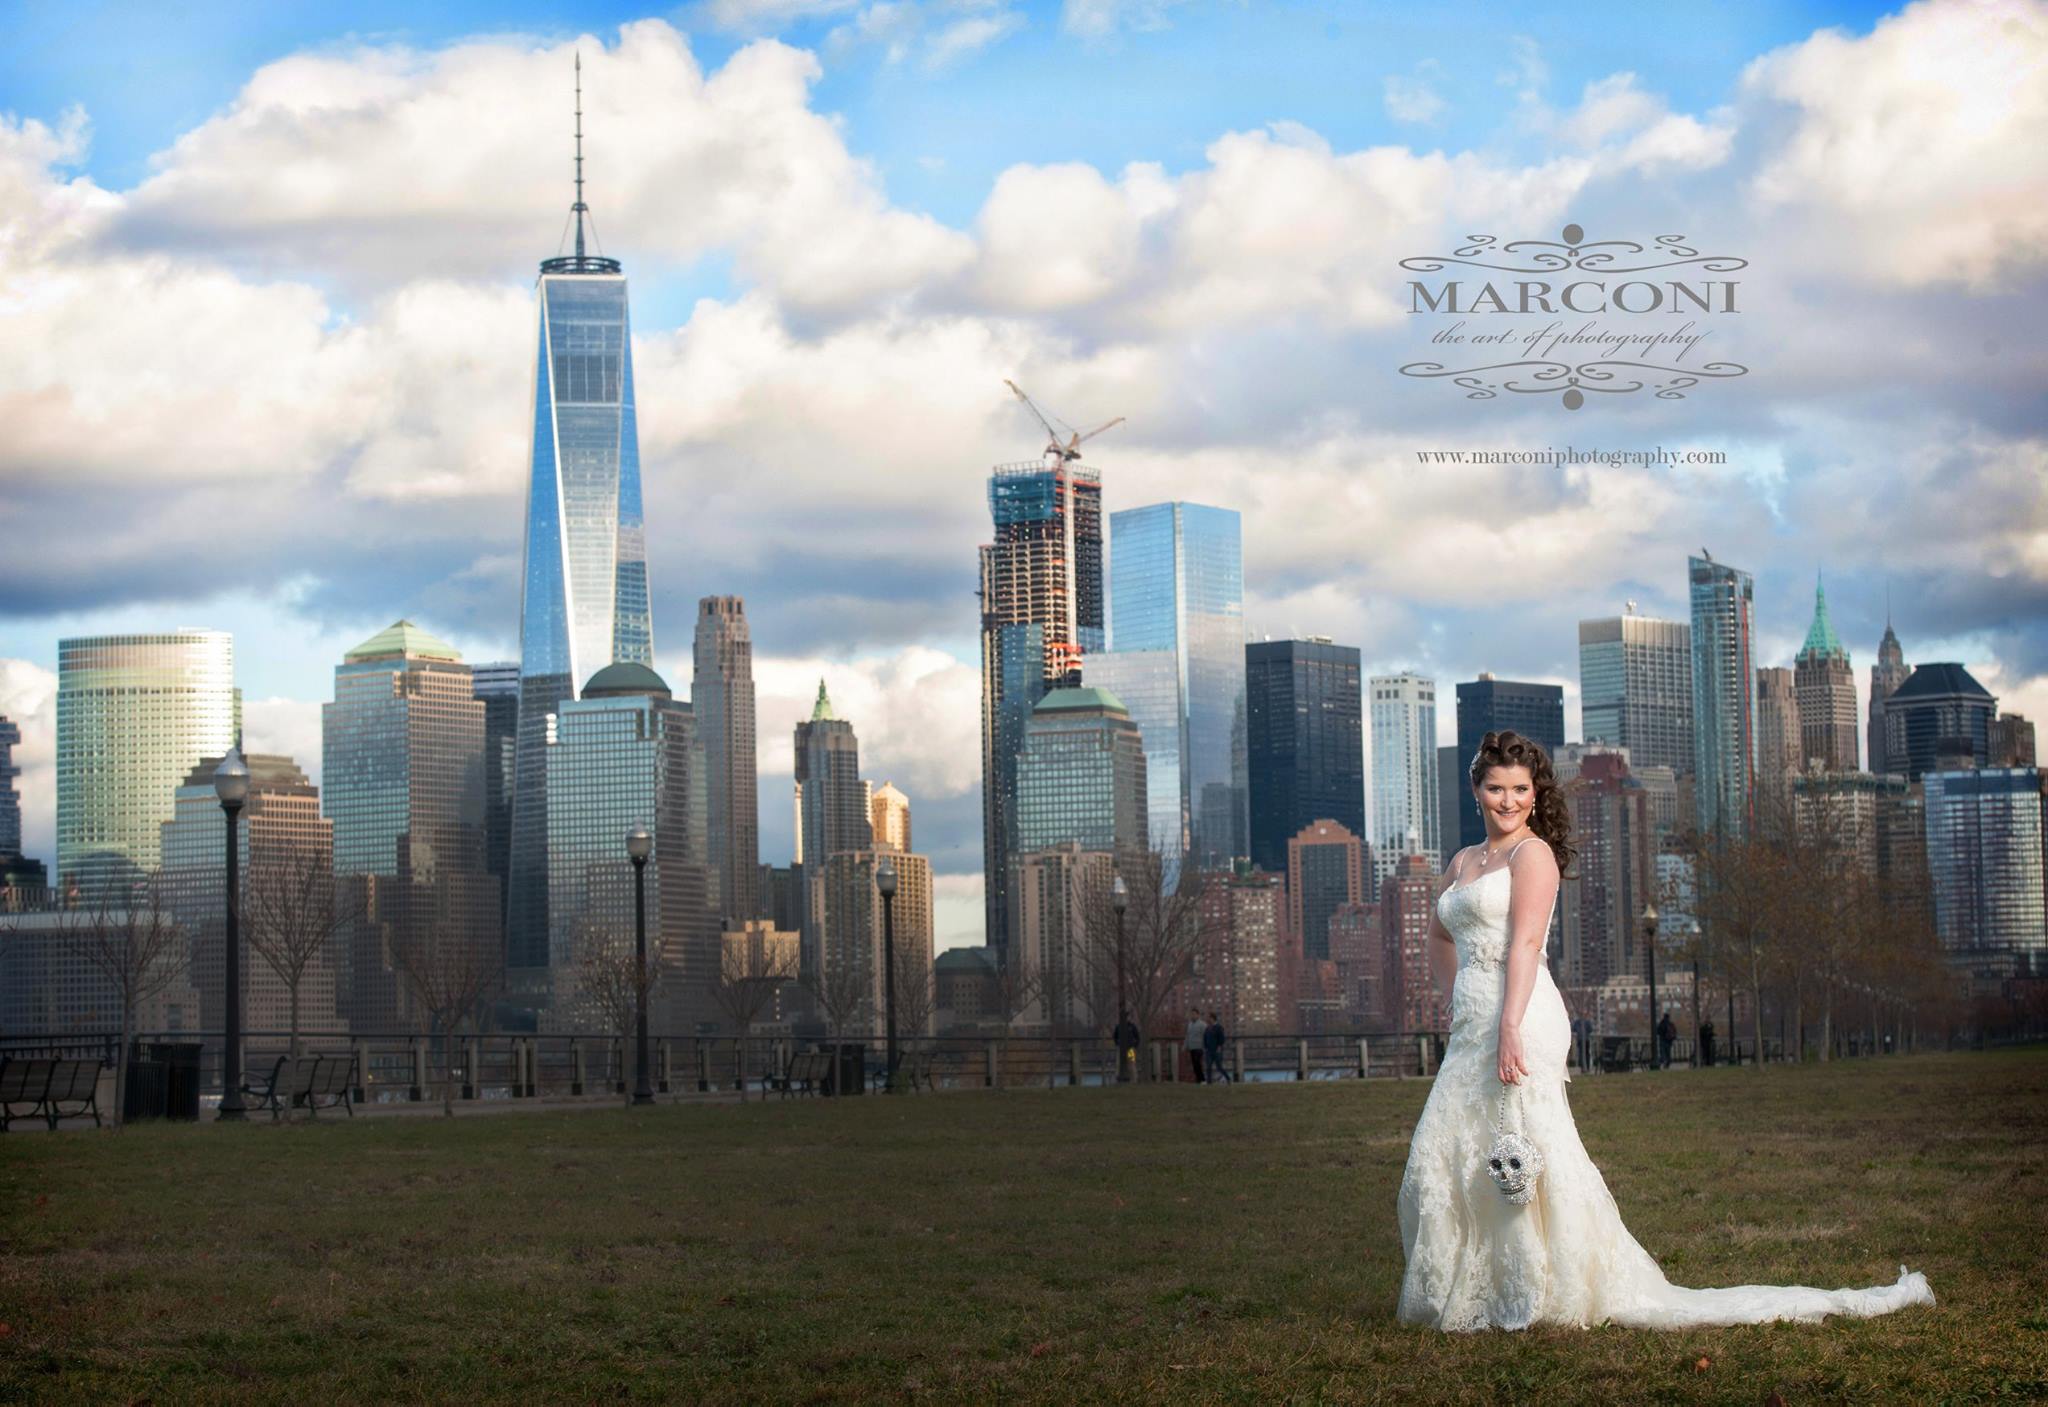 jamie-with-new-york-as-a-backdrop-a-great-shot-taken-by-chris-marconi